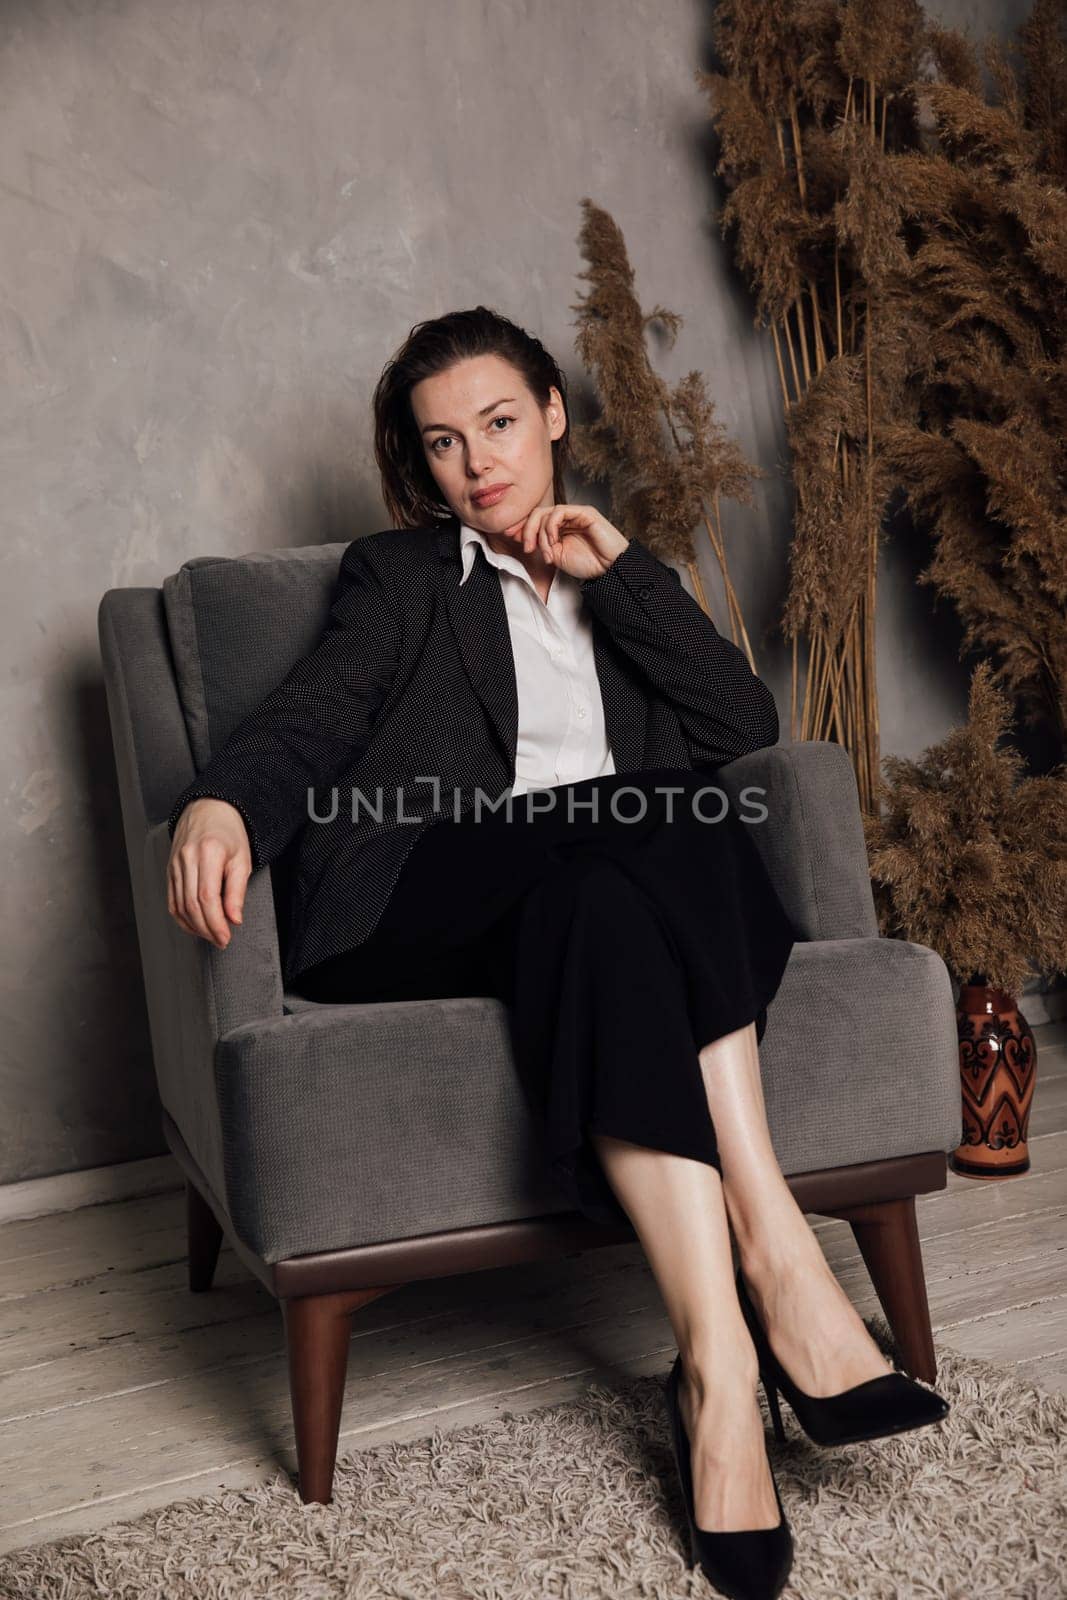 A woman sits in an armchair in an office